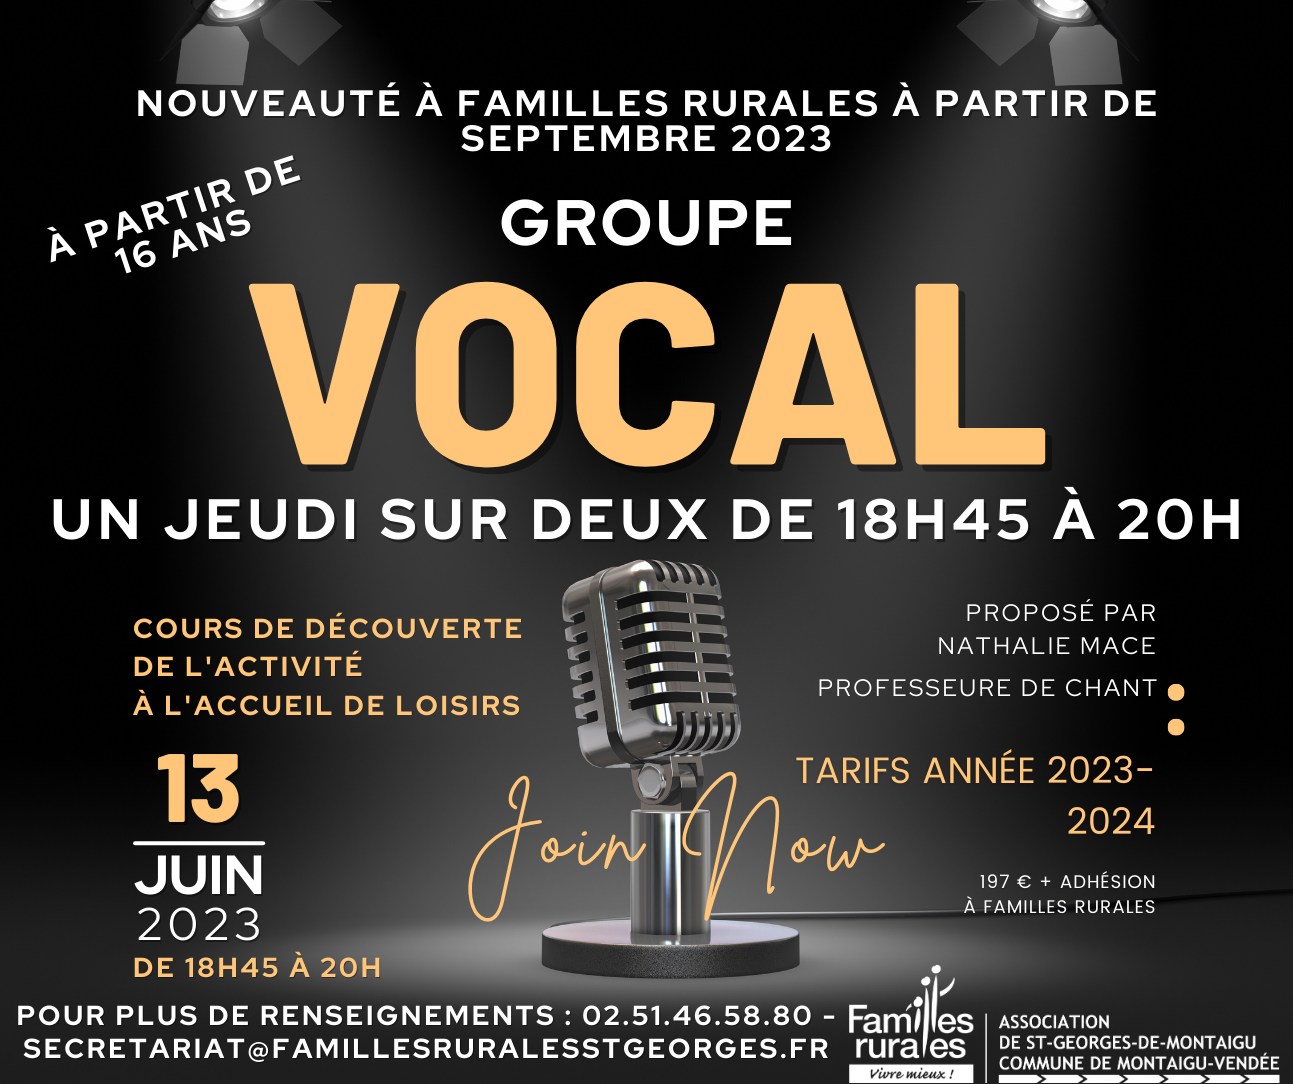 Groupe vocal